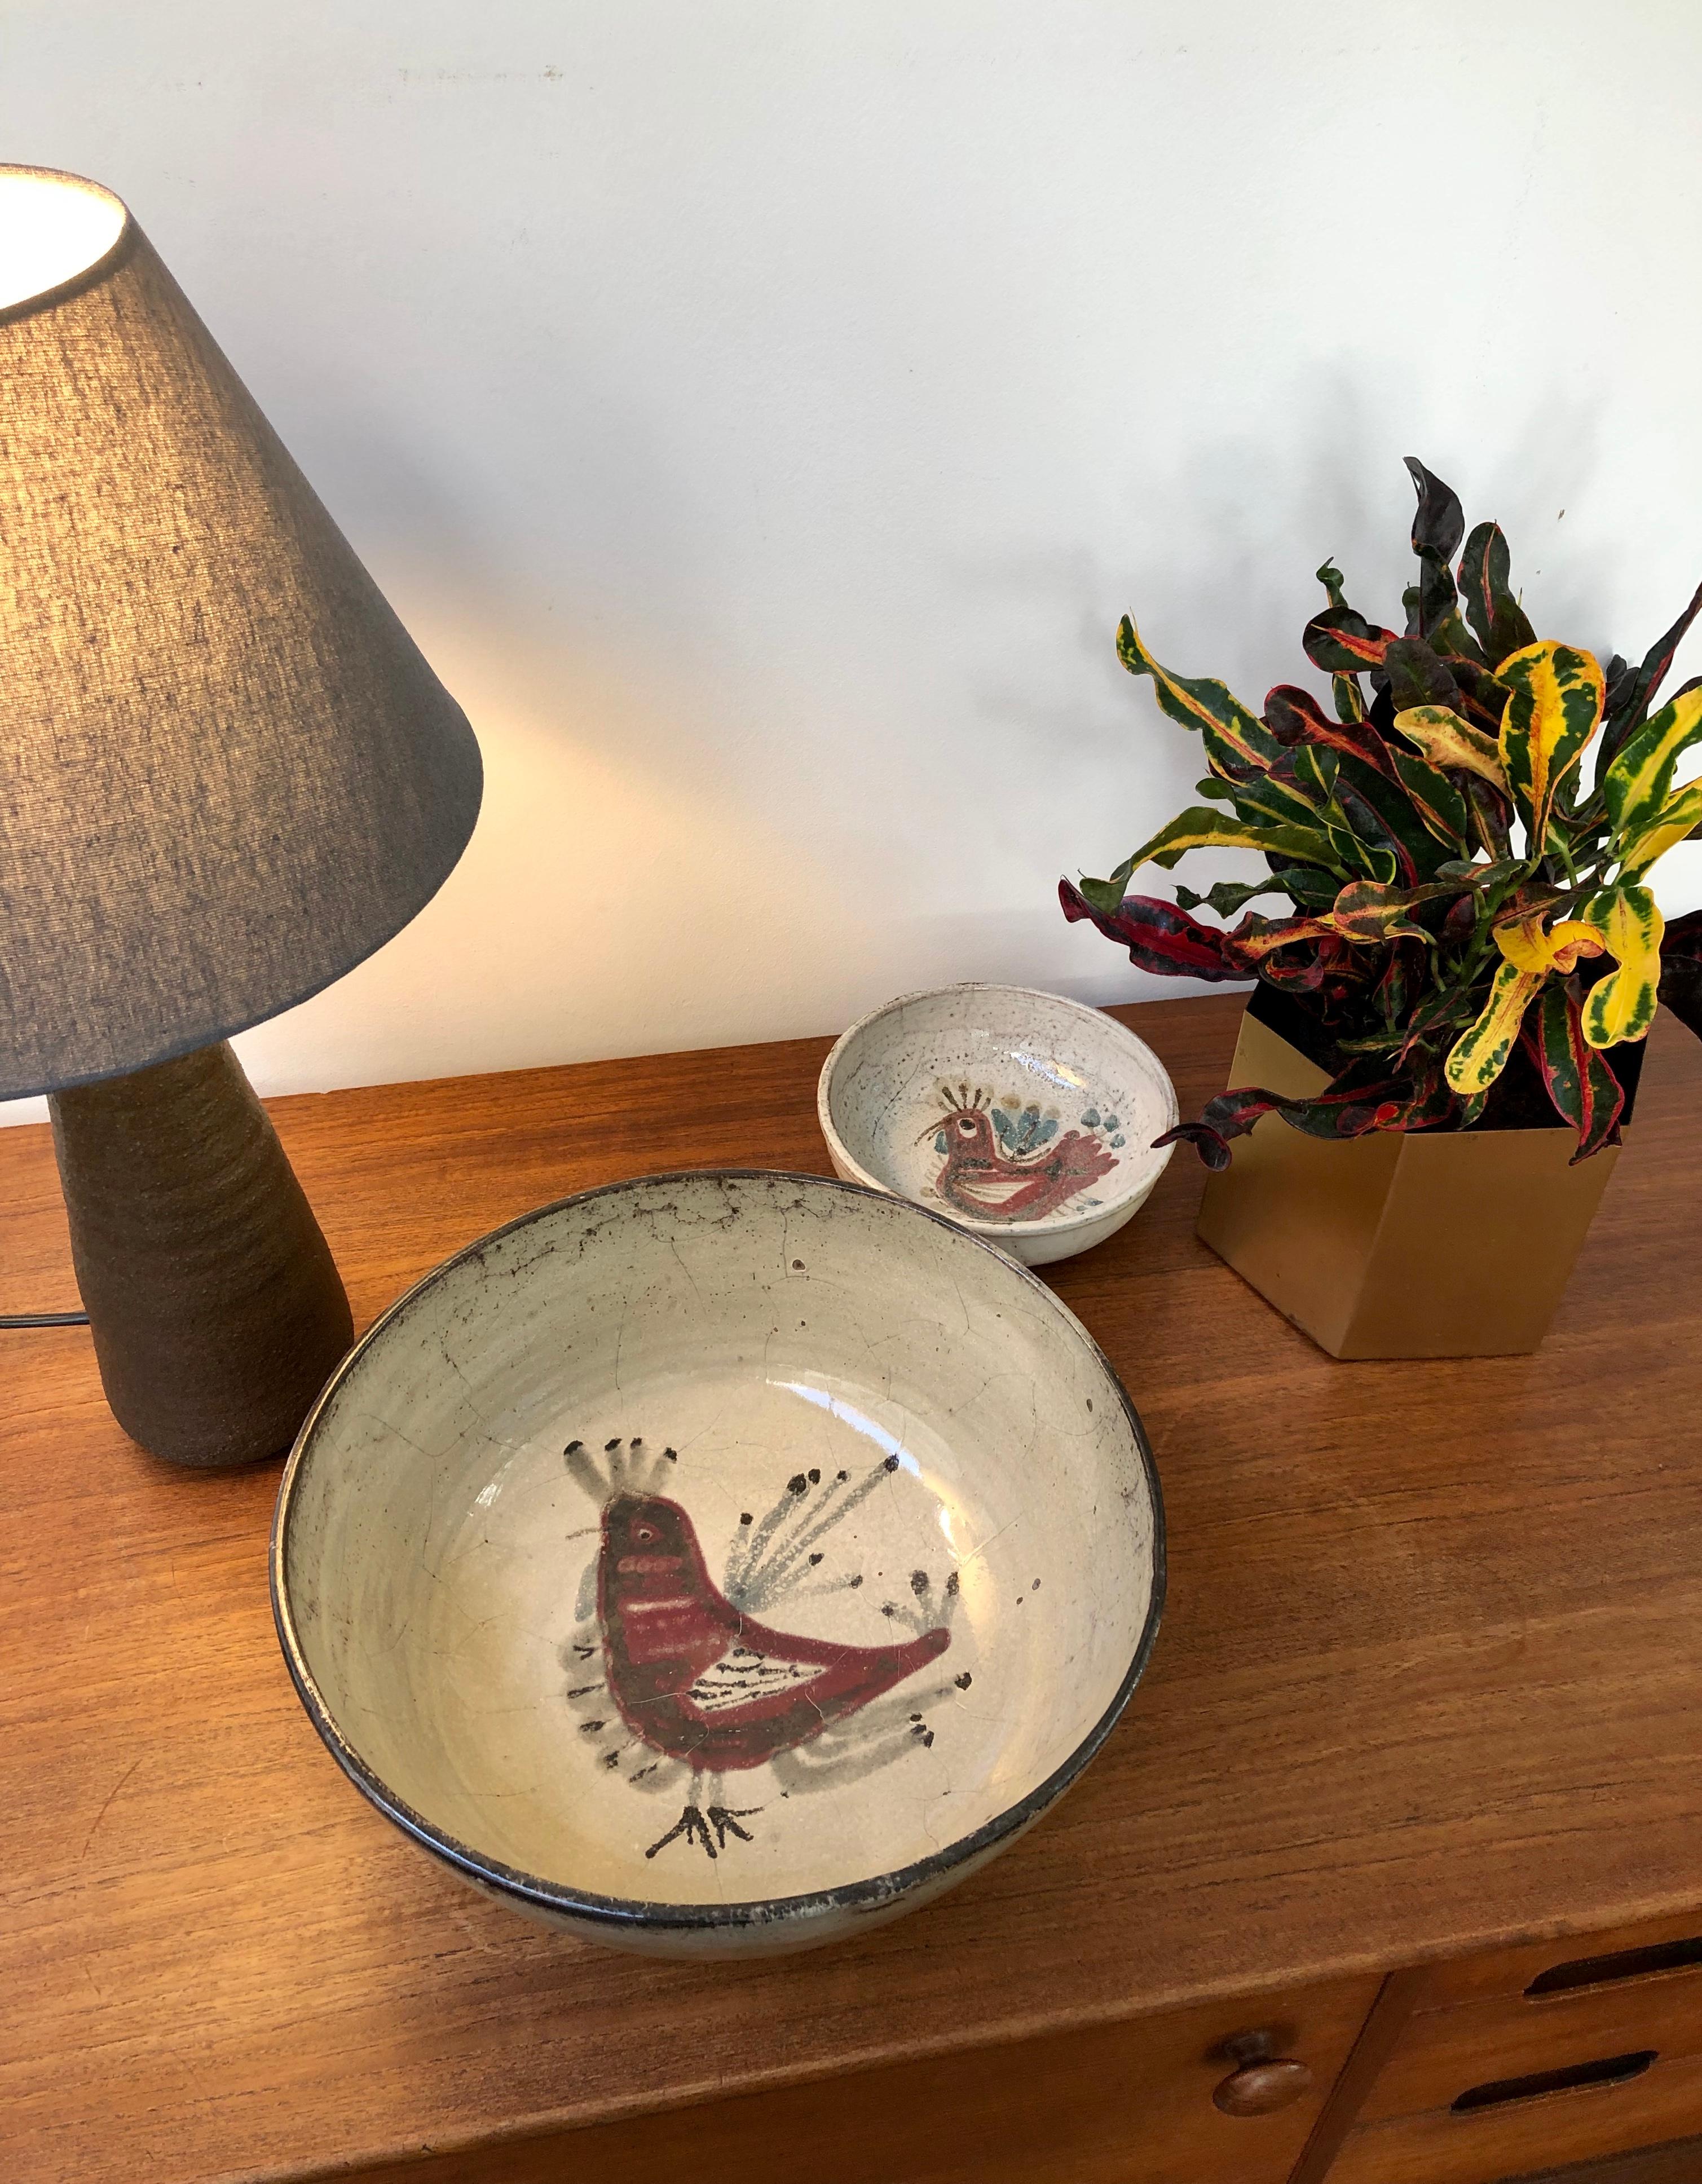 Mid-Century Modern 'Ceramic French Rooster Motif Bowl' by Gustave Reynaud - Le Mûrier, circa 1950s